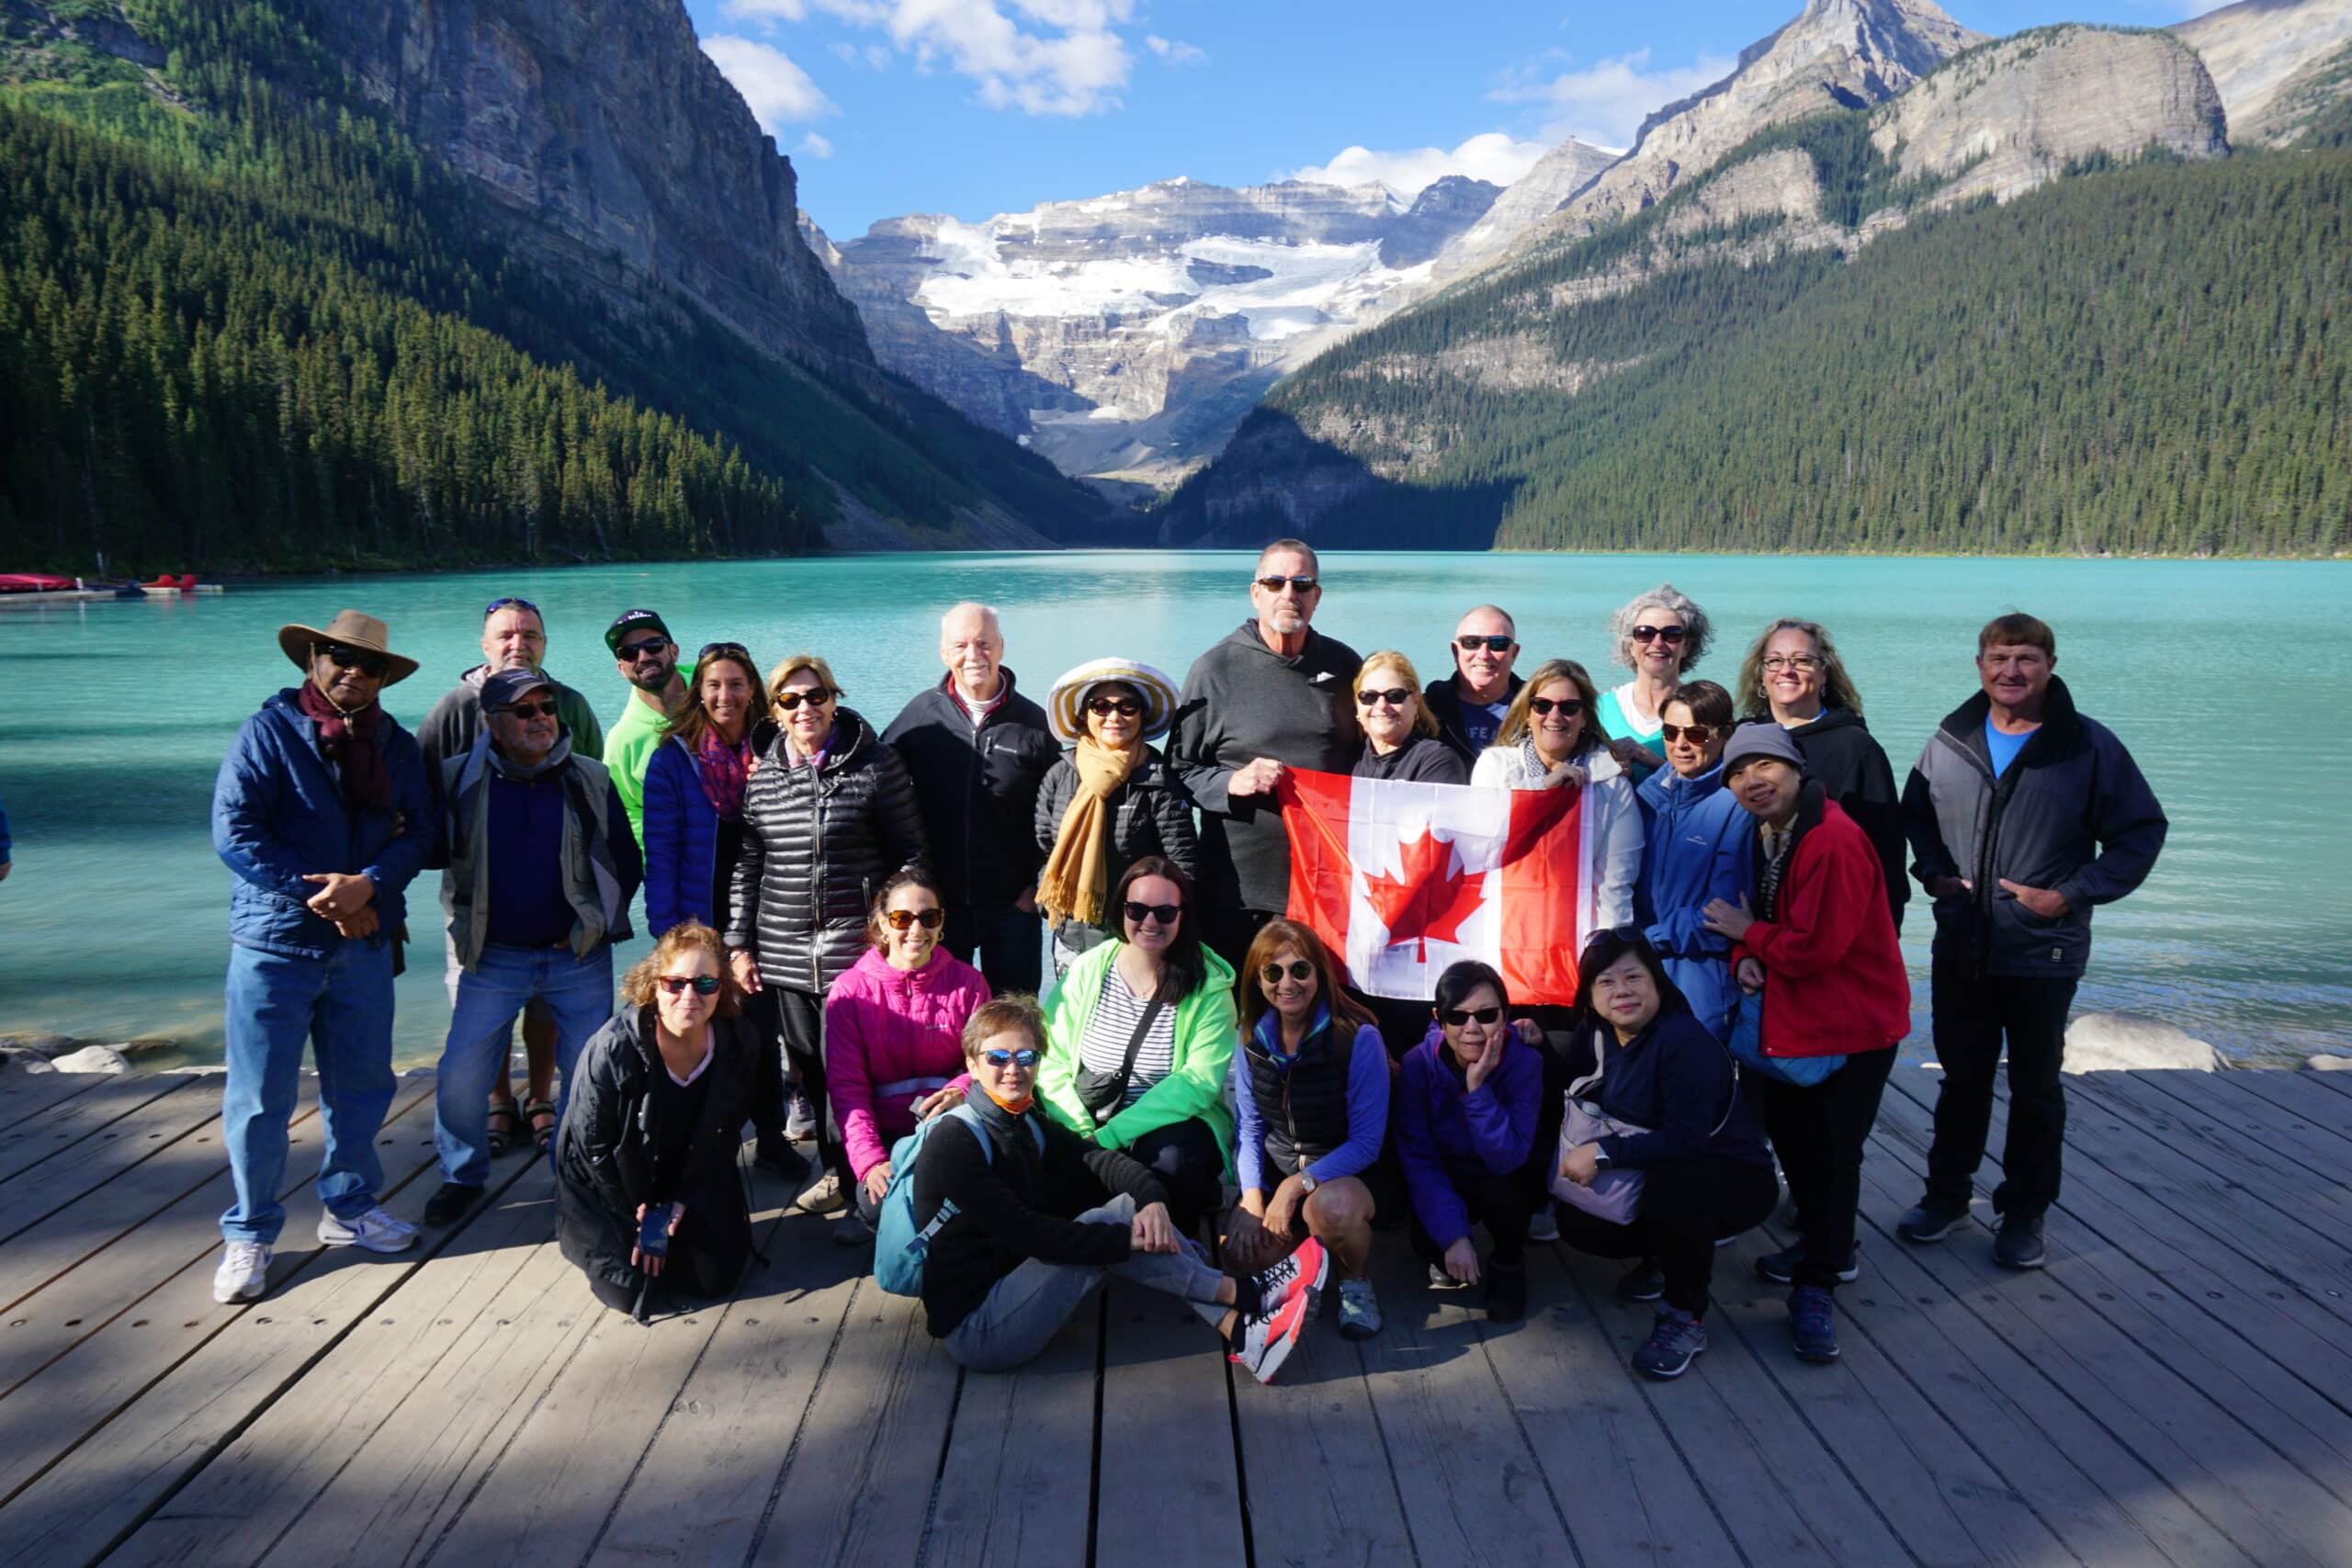 https://www.discovercanadatours.com/wp-content/uploads/2023/02/LakeLouise31-scaled.jpg